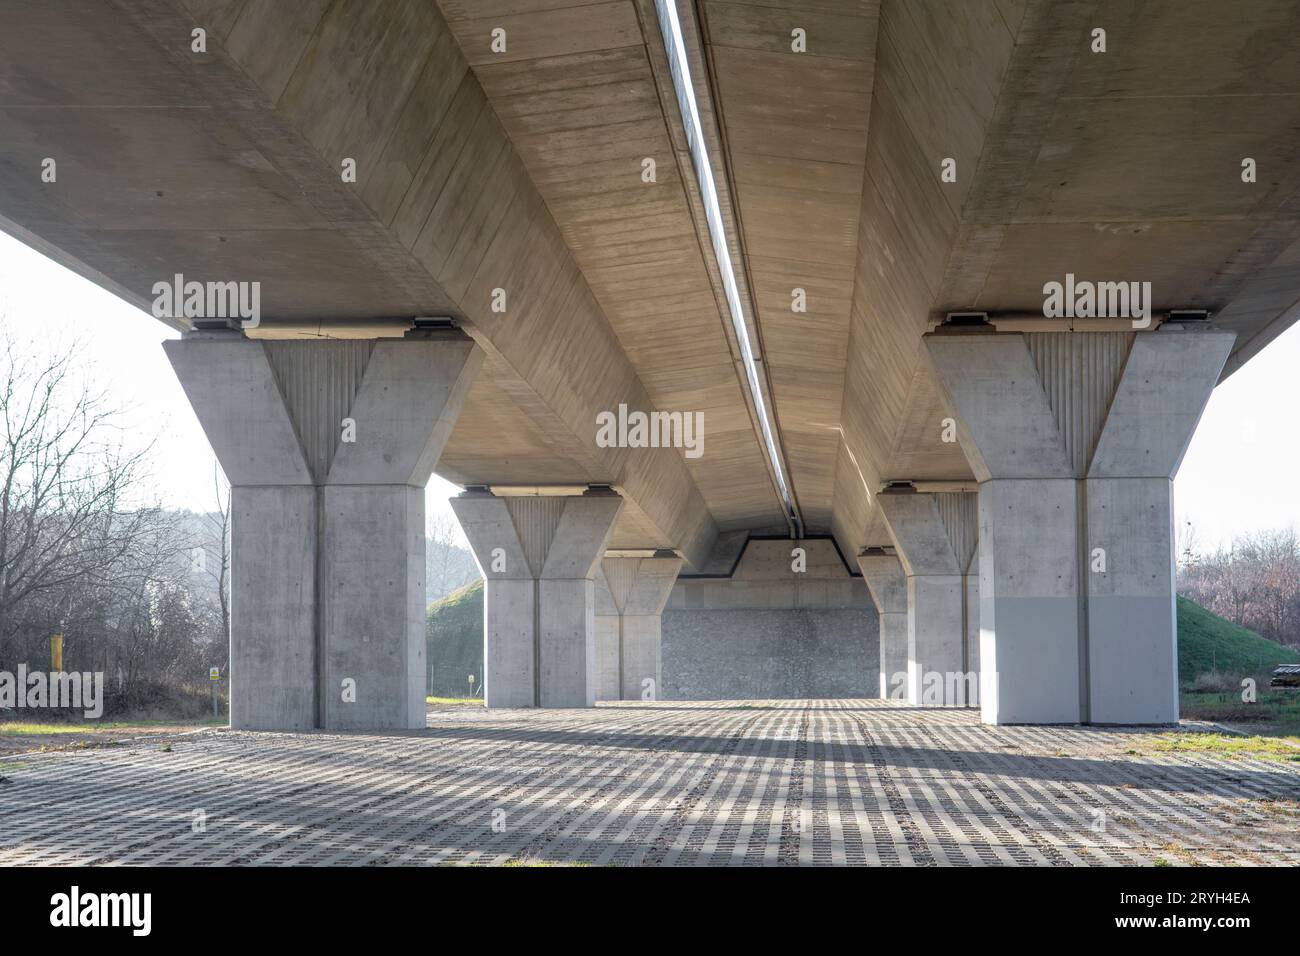 Vehicle overpass on concrete supports. Overbridge or Flyover built on concrete pylons. Nitra. Slovakia. Stock Photo